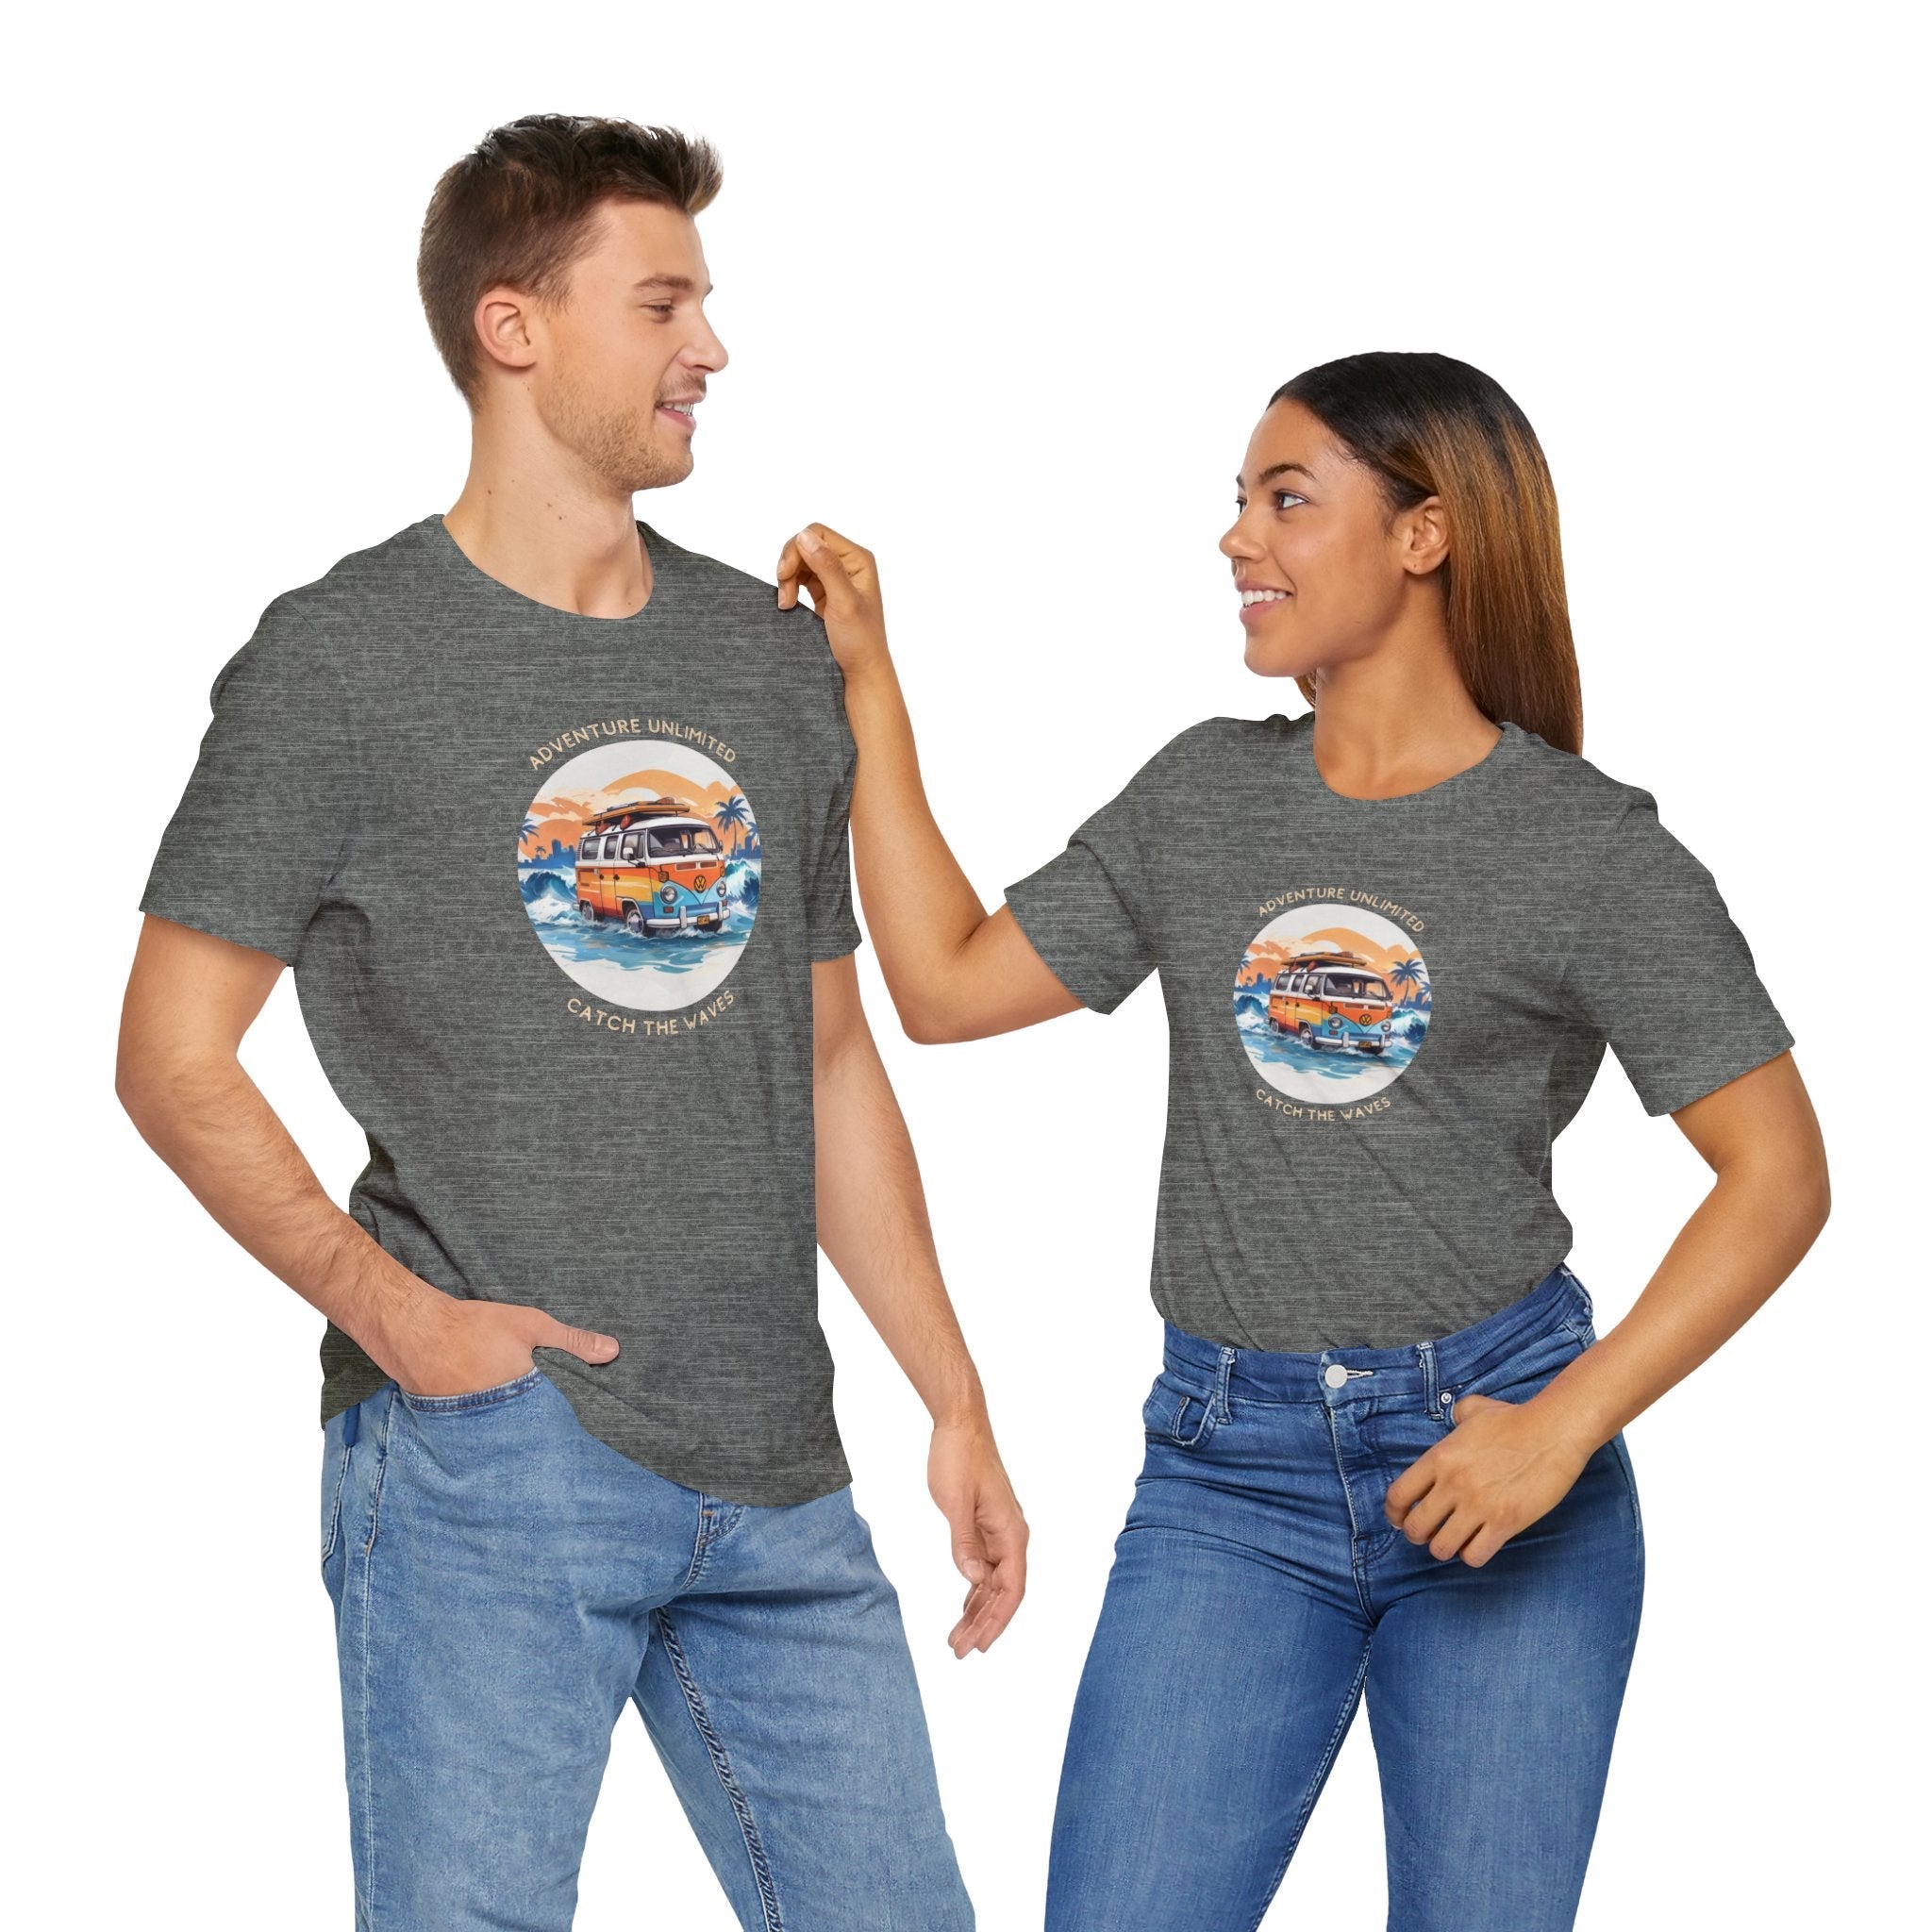 Adventure Unlimited printed unisex tee with ’I love you’ design worn by man and woman